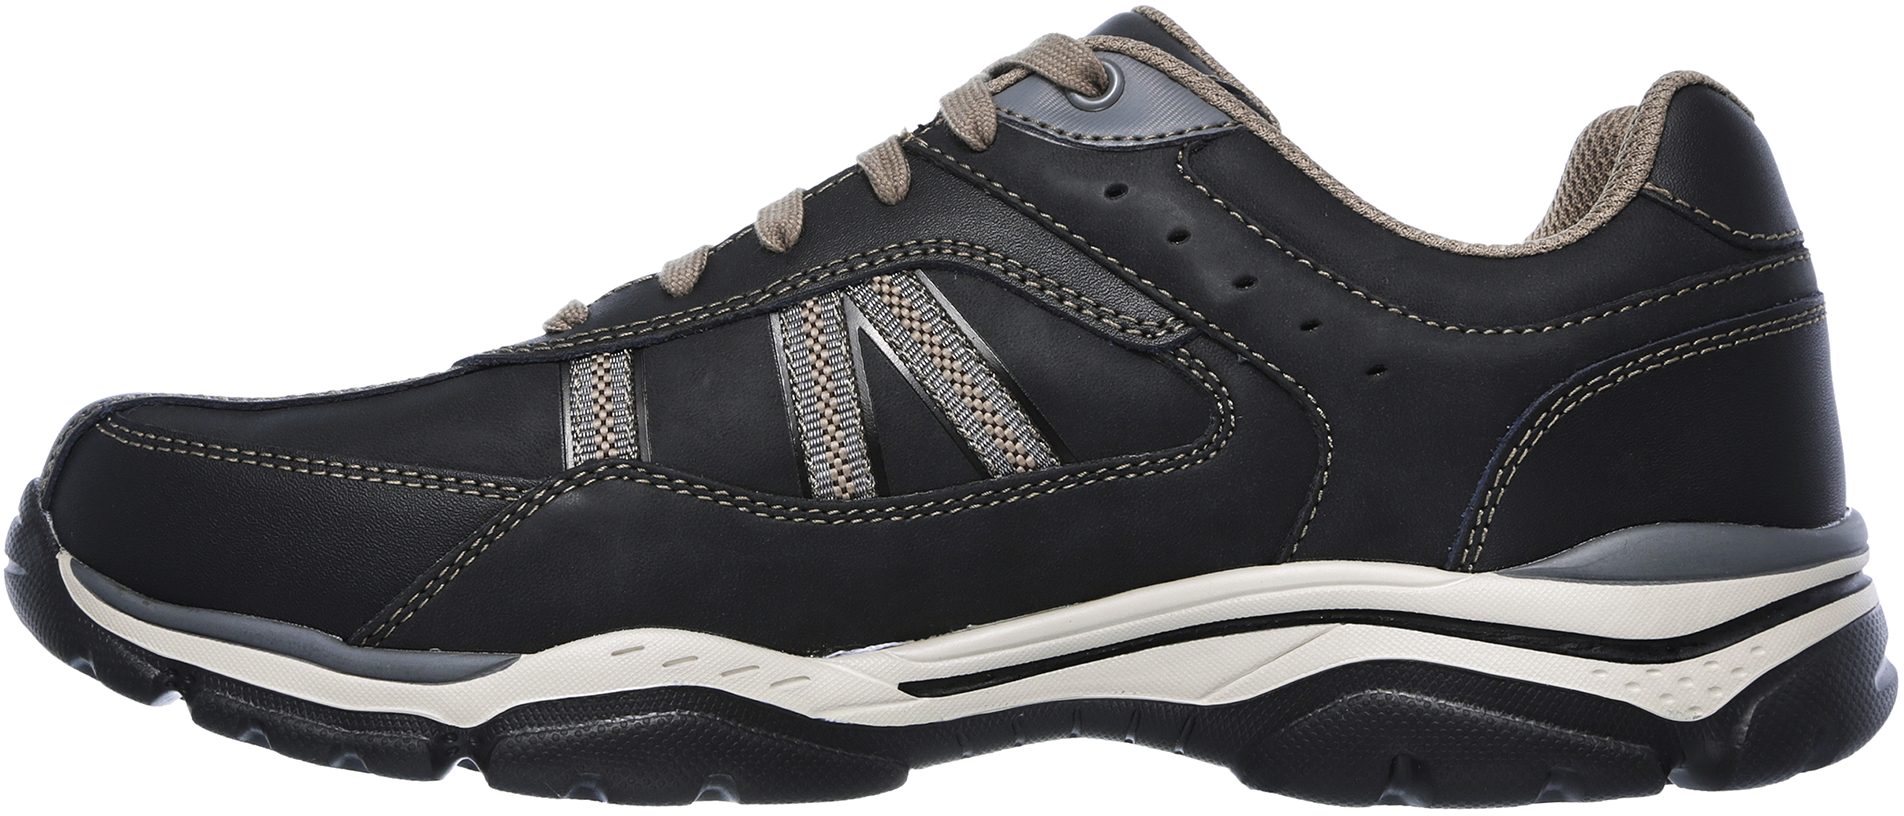 Skechers Relaxed Fit: Rovato - Texon Black / Taupe 65418 BKTP ...